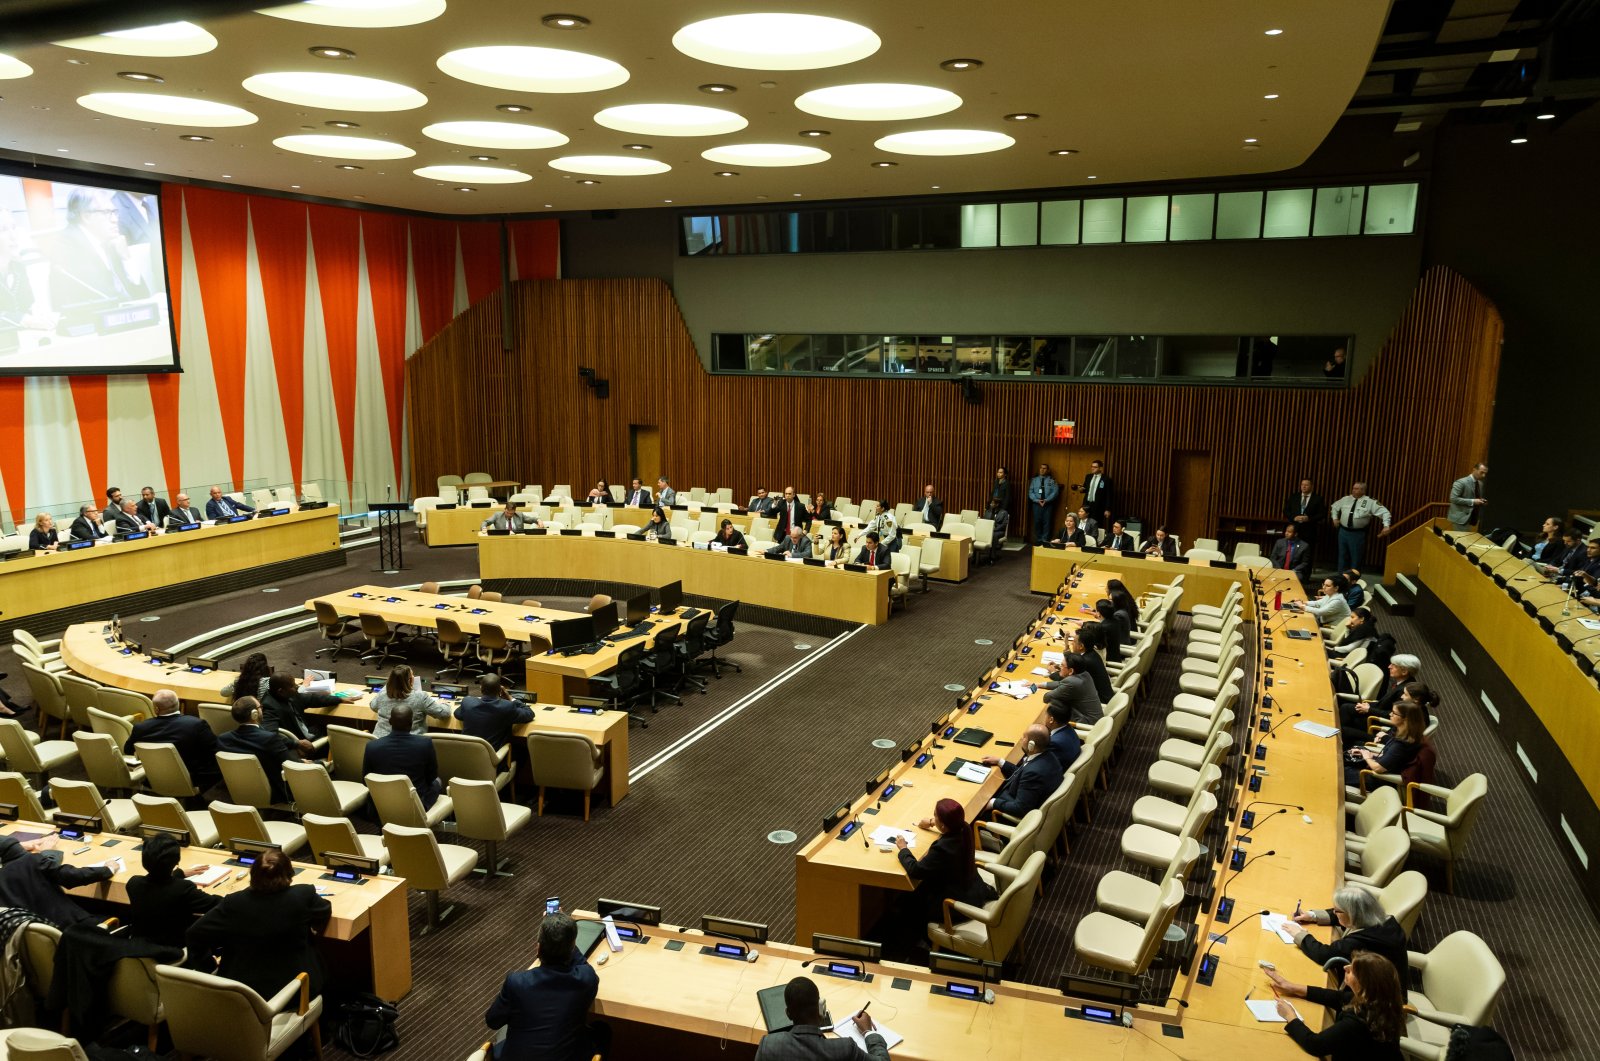  ECOSOC meeting at UN Headquarters in New York City, Oct. 16, 2018. (Shutterstock File Photo)